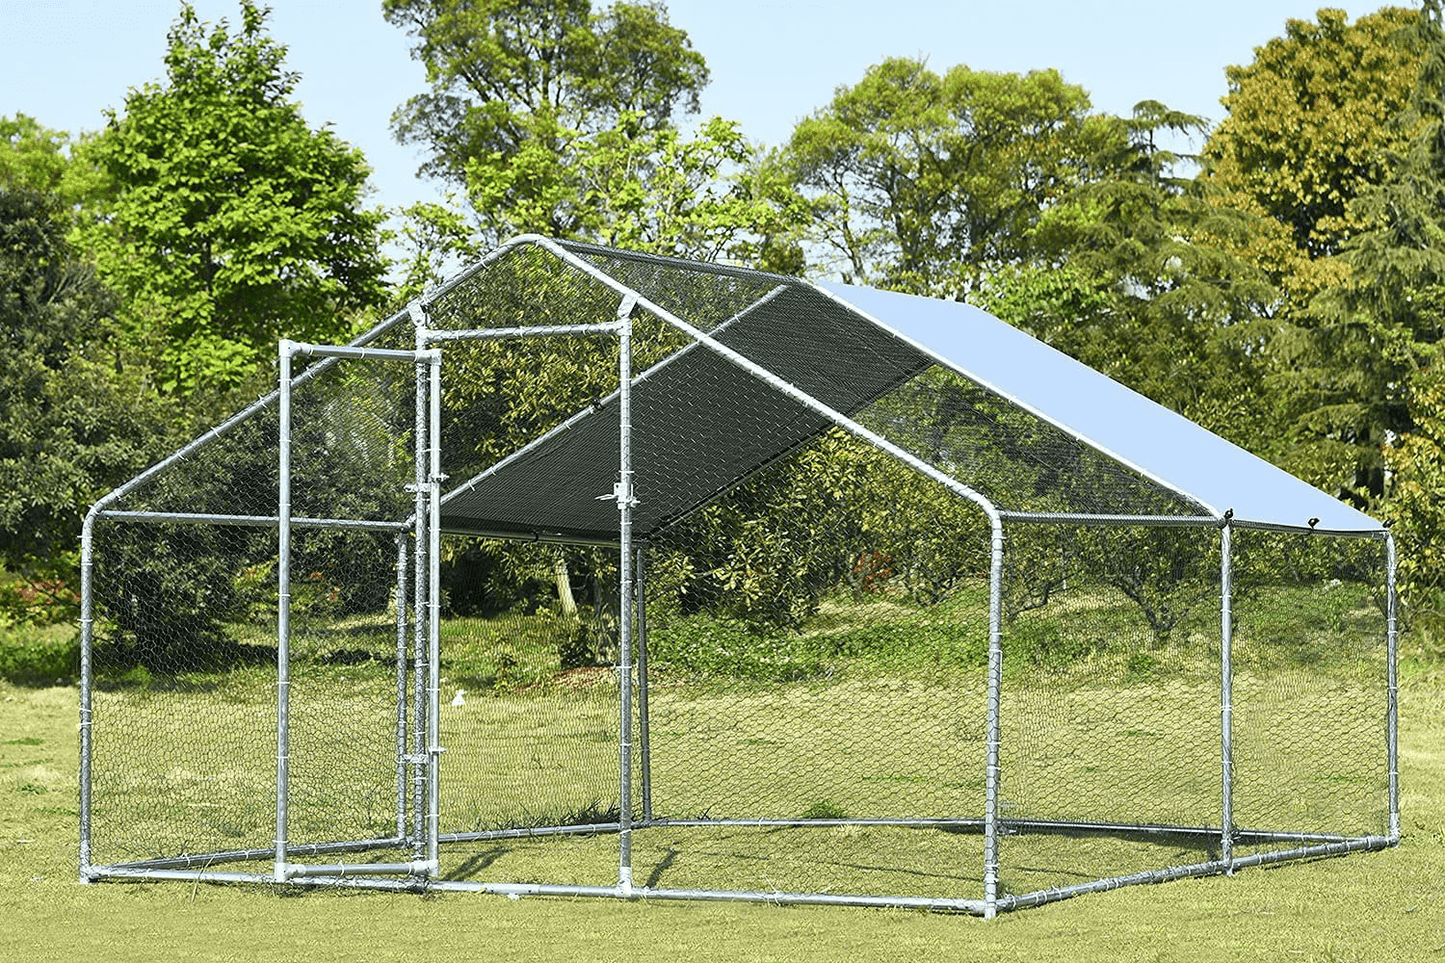 1.25” Tube Chicken Coop Run Large Metal Chicken Pen Outdoor Walkin Chicken Runs for Yard Large Rabbits Habitat Spire Shaped Poultry Cage with Waterproof Cover for Backyard Farm(9.8’L X 13.1’W X 6.4’H) Animals & Pet Supplies > Pet Supplies > Dog Supplies > Dog Kennels & Runs Catrimown Spire 9.8’L x 13.1’W x 6.4’H 